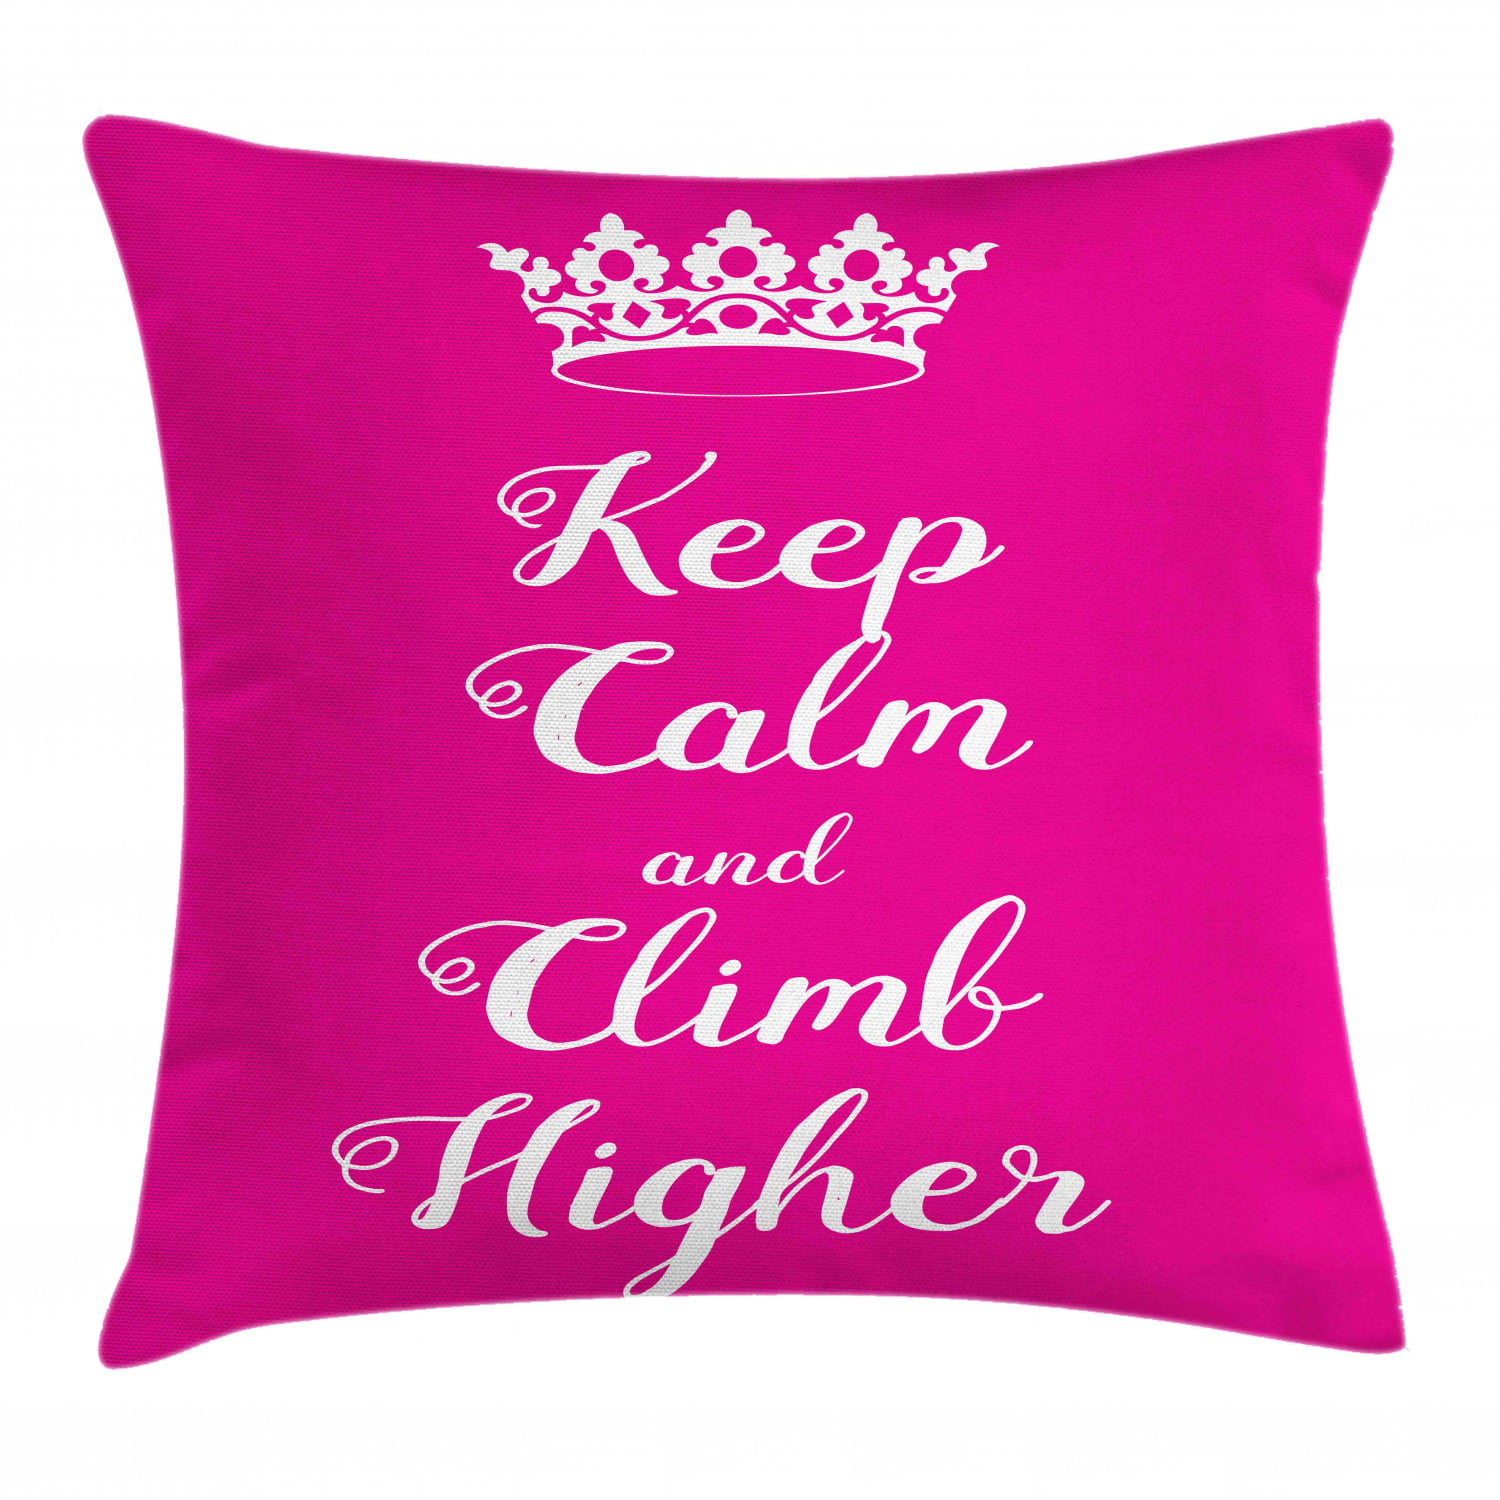 Keep Calm Throw Pillow Cushion Cover, Simplistic Design Feminine Image with Climb Higher Quote and Queen Crown, Decorative Square Accent Pillow Case, 20" X 20", Magenta and White, by Ambesonne